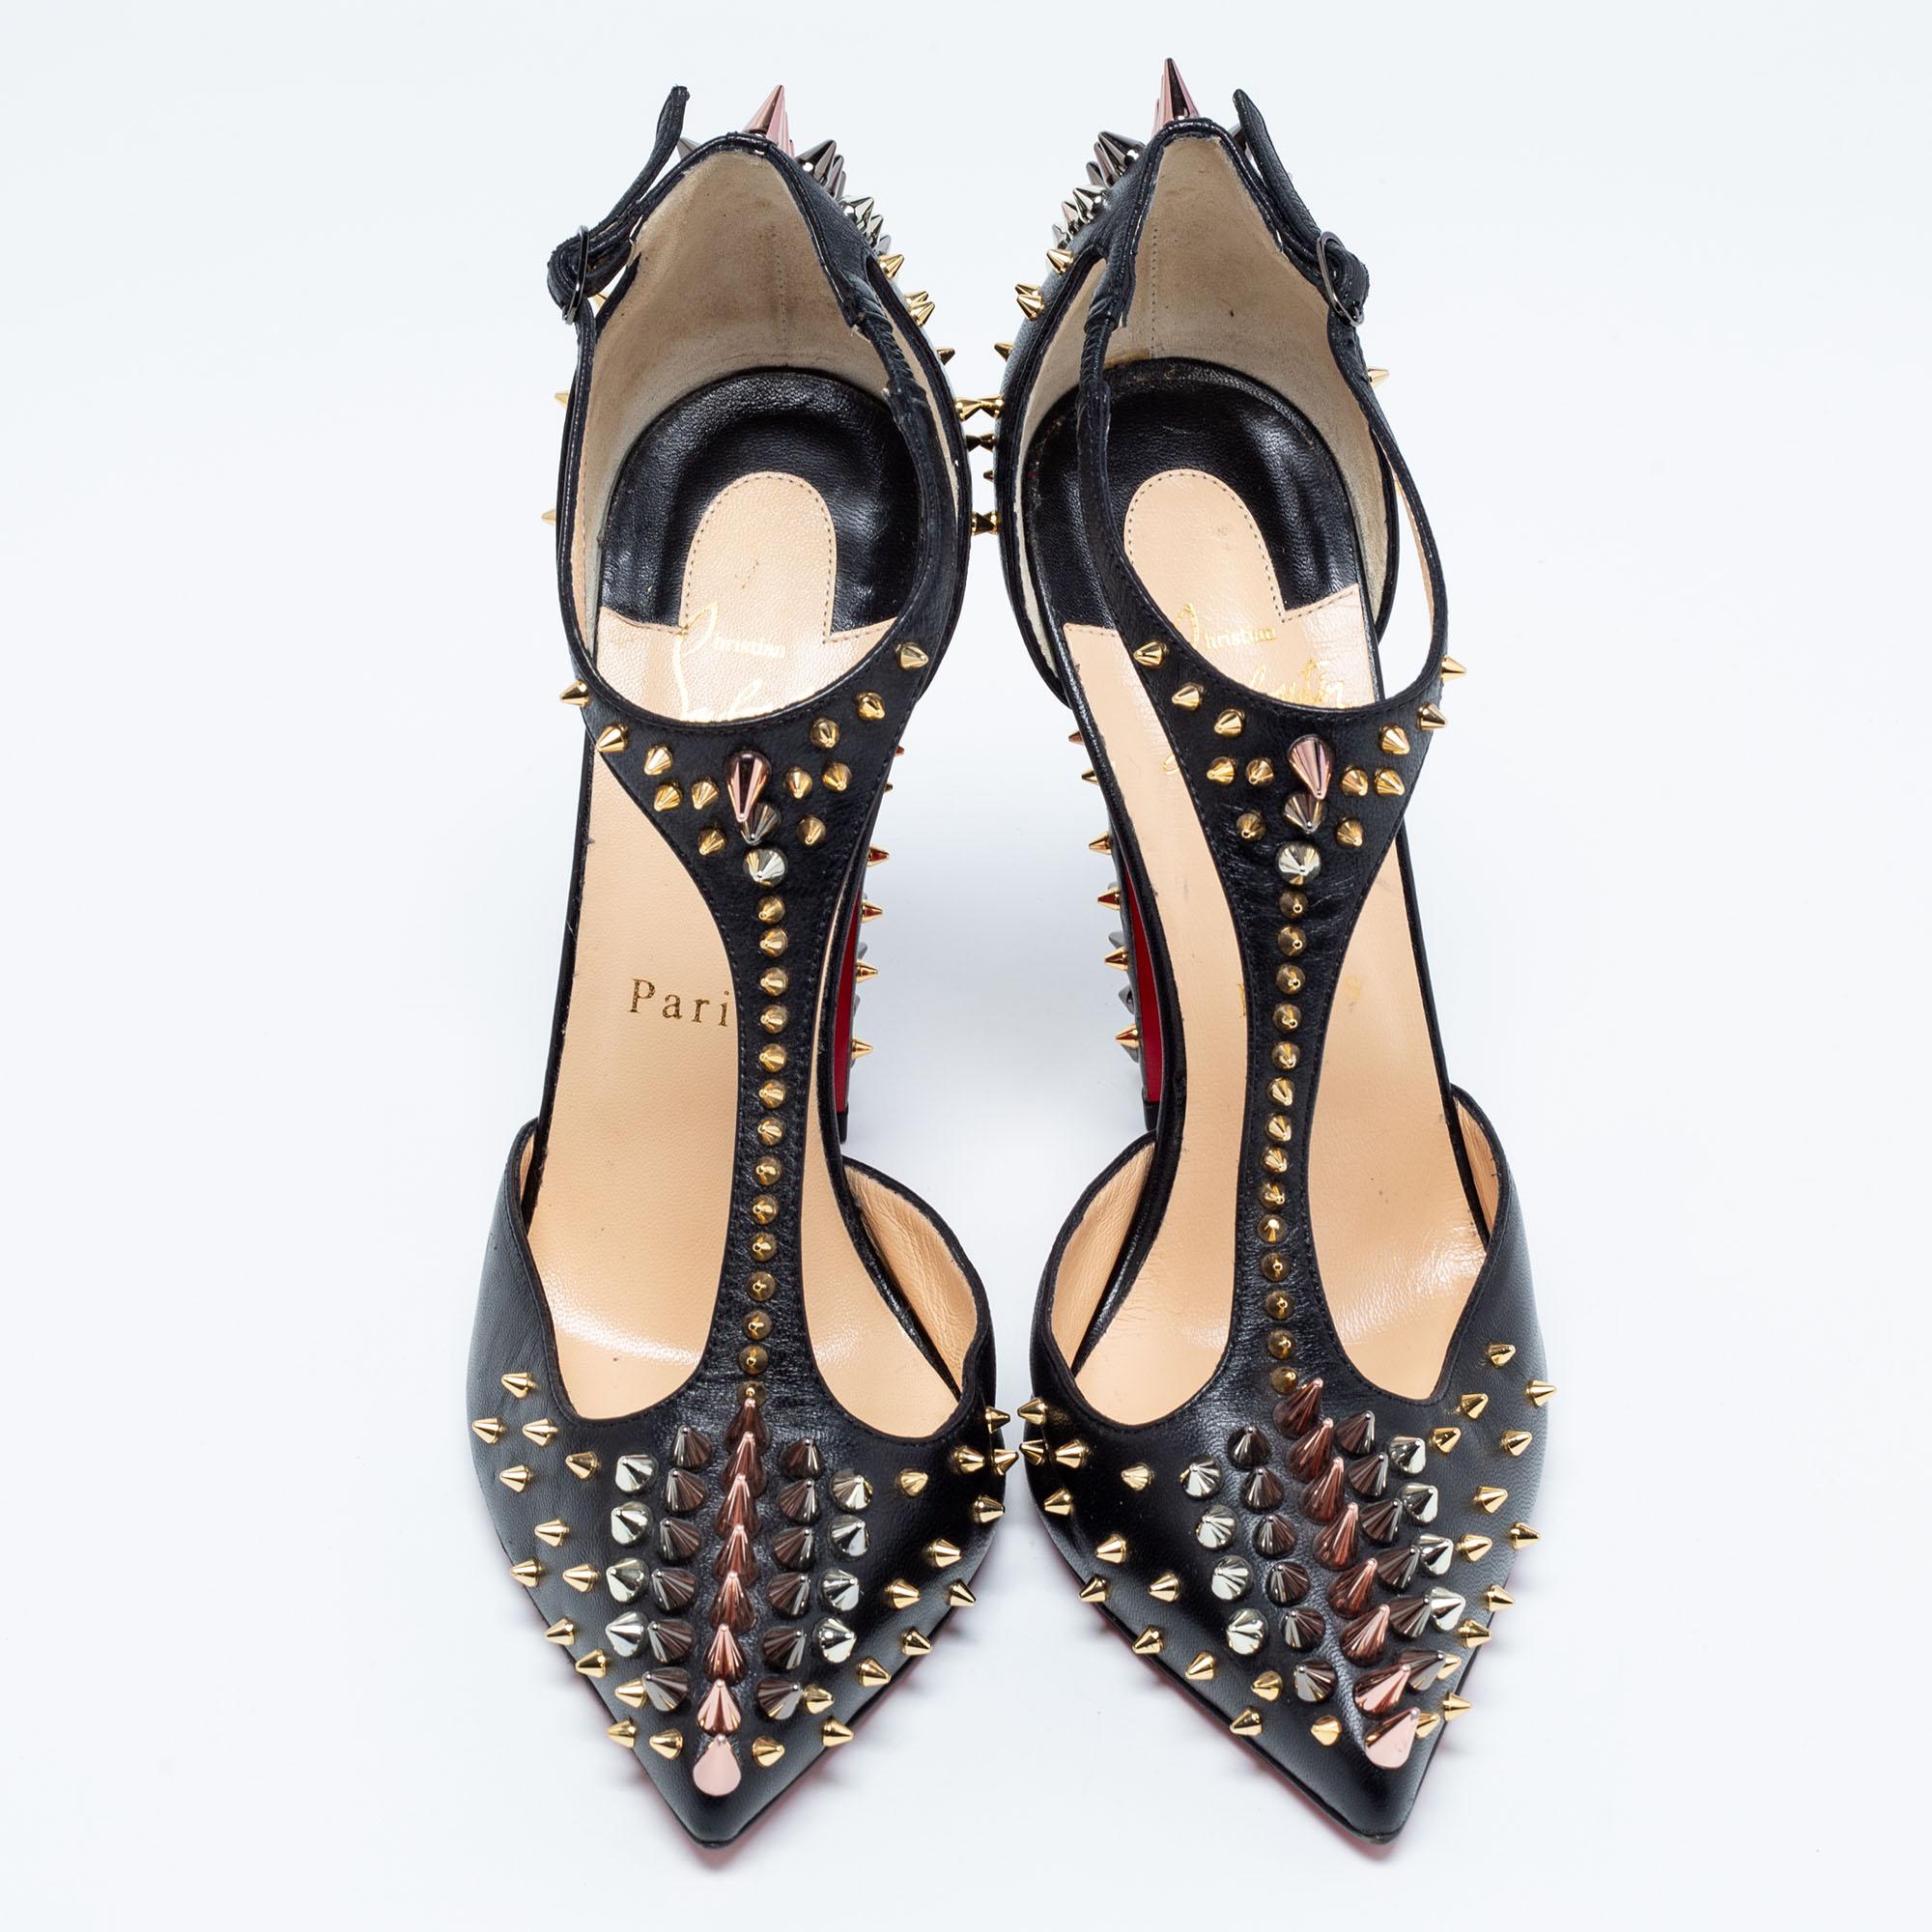 Highly fashionable and edgy, this pair of Christian Louboutin pumps is striking with stud embellishments. It is carfted from leather with a T-strap, gunmetal-tone hardware, and 12cm heels. The signature red-lacquered soles will reflect luxury in